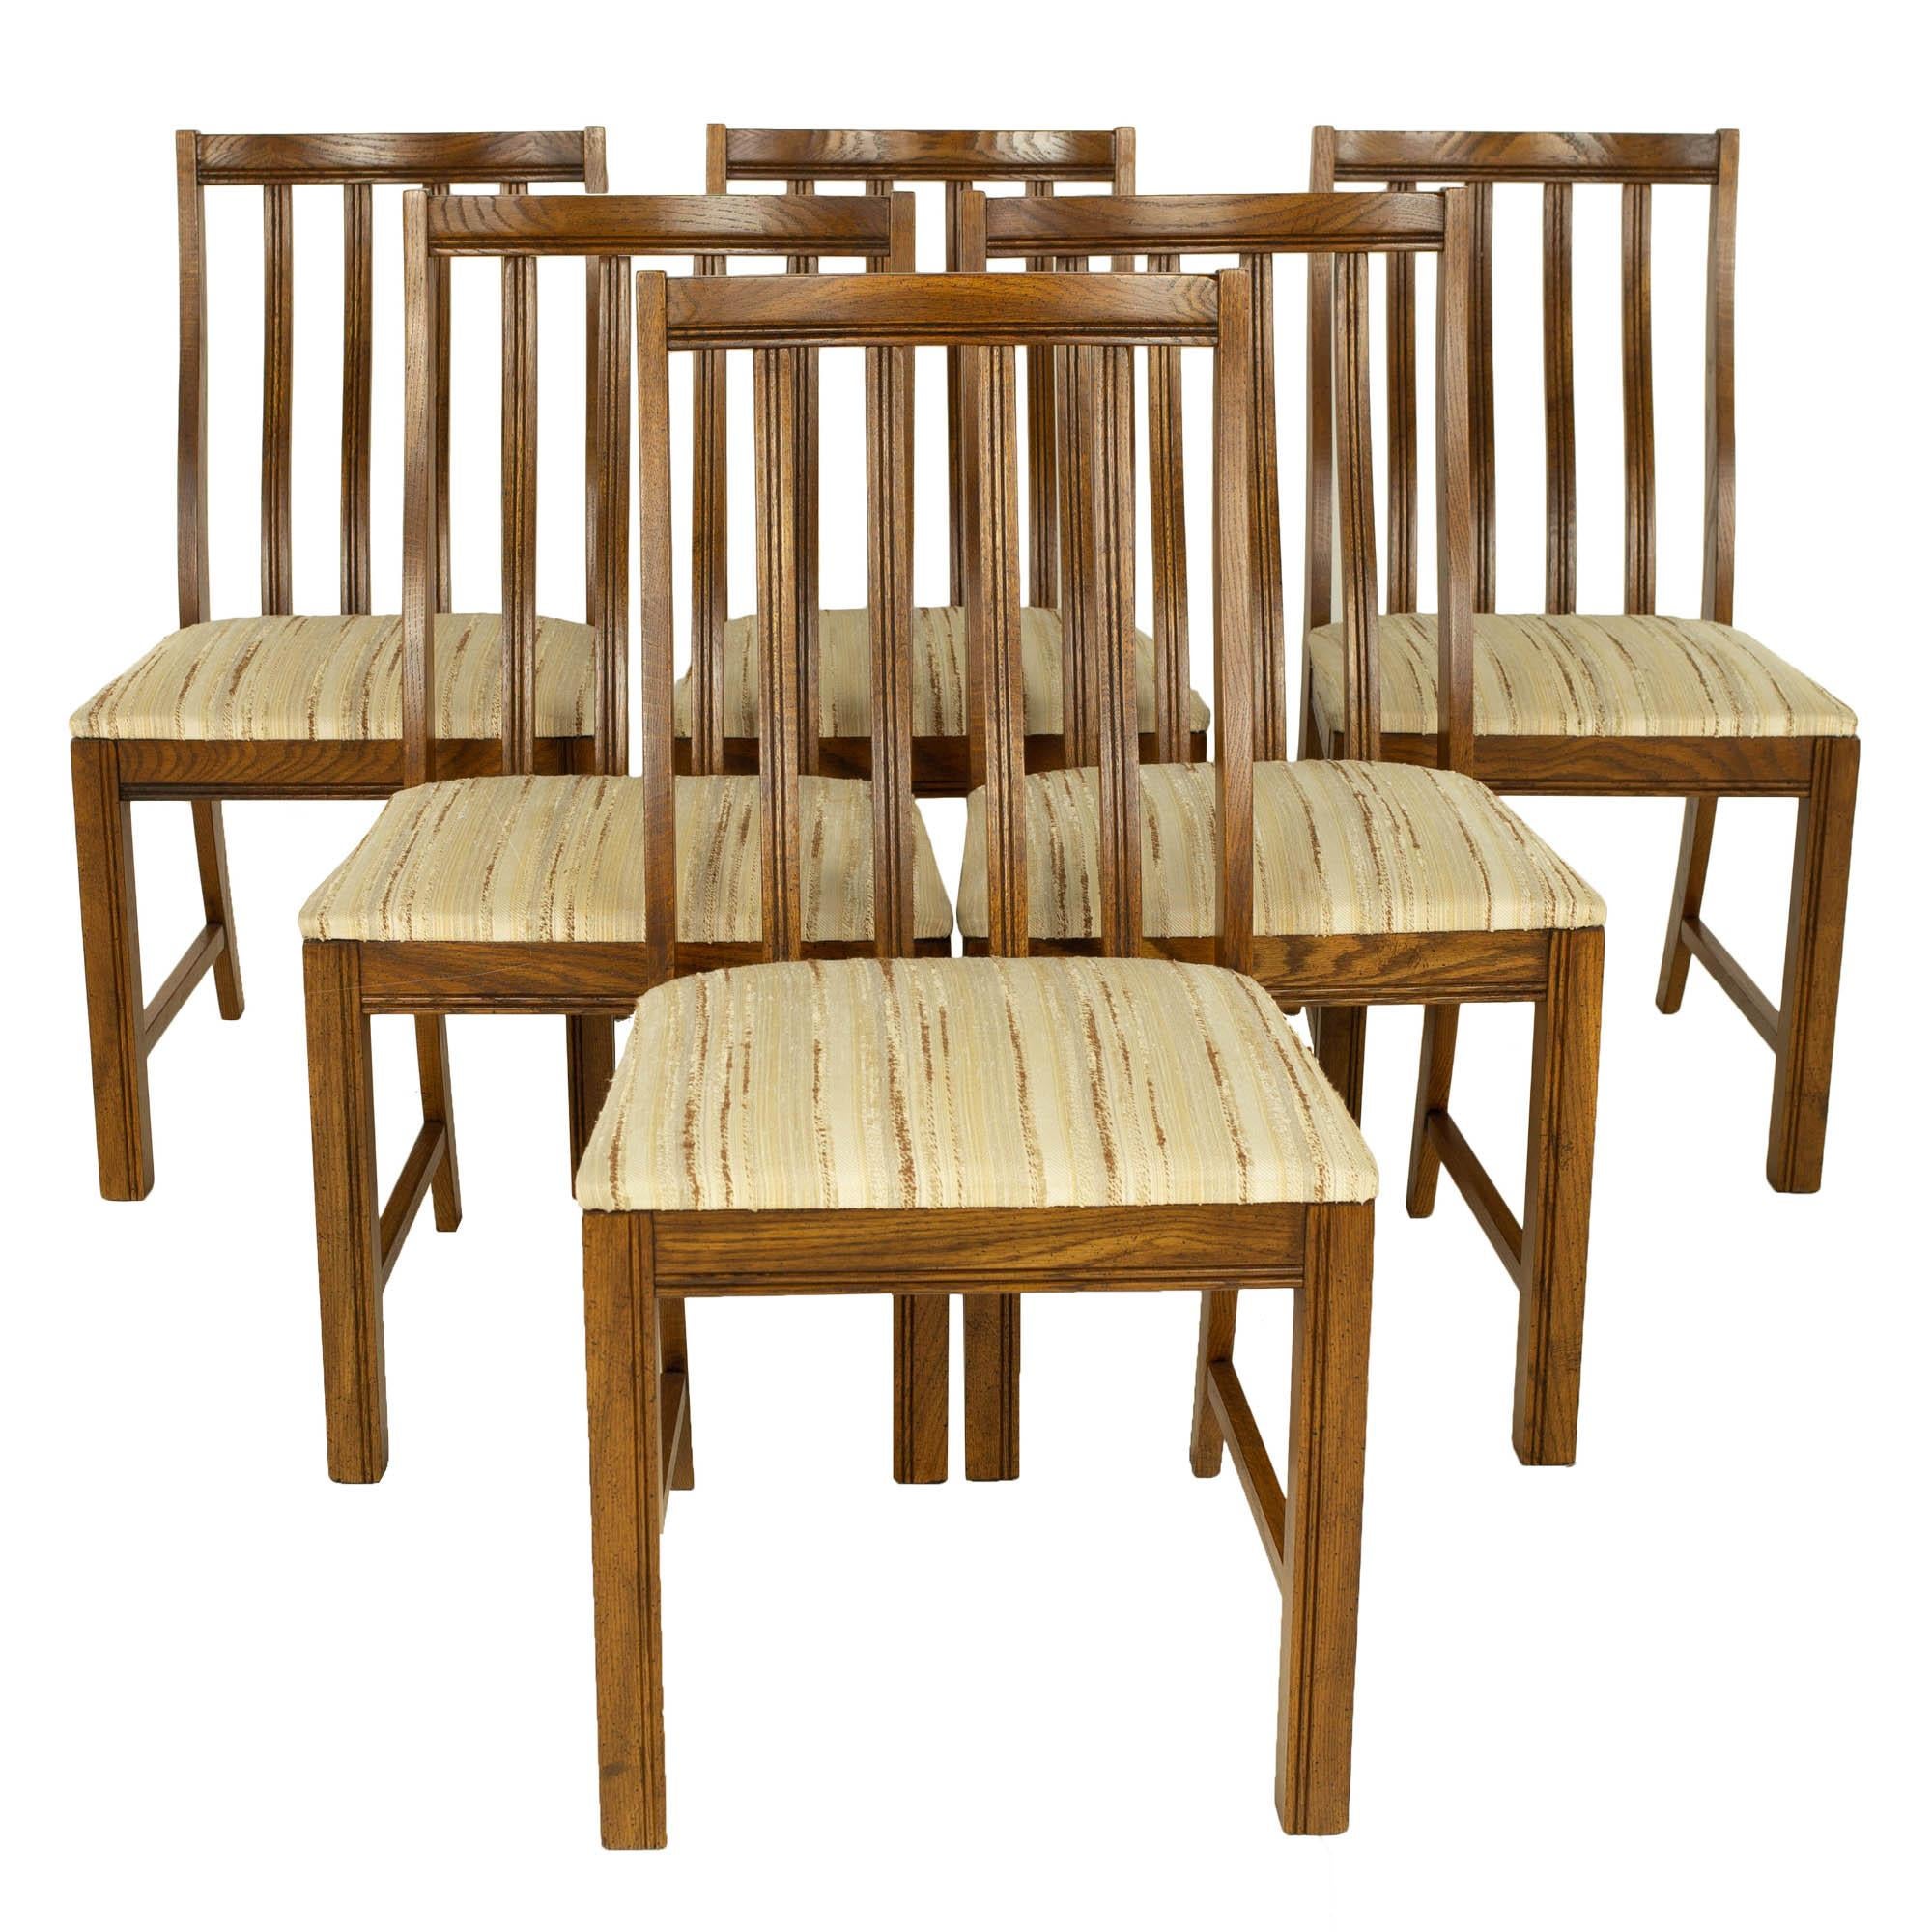 Lane First Edition Style Keller mid century walnut dining chairs - Set of 6

Each chair measures: 16 wide x 20 deep x 34.5 high, with a seat height/chair clearance of 18.5 inches

?All pieces of furniture can be had in what we call restored